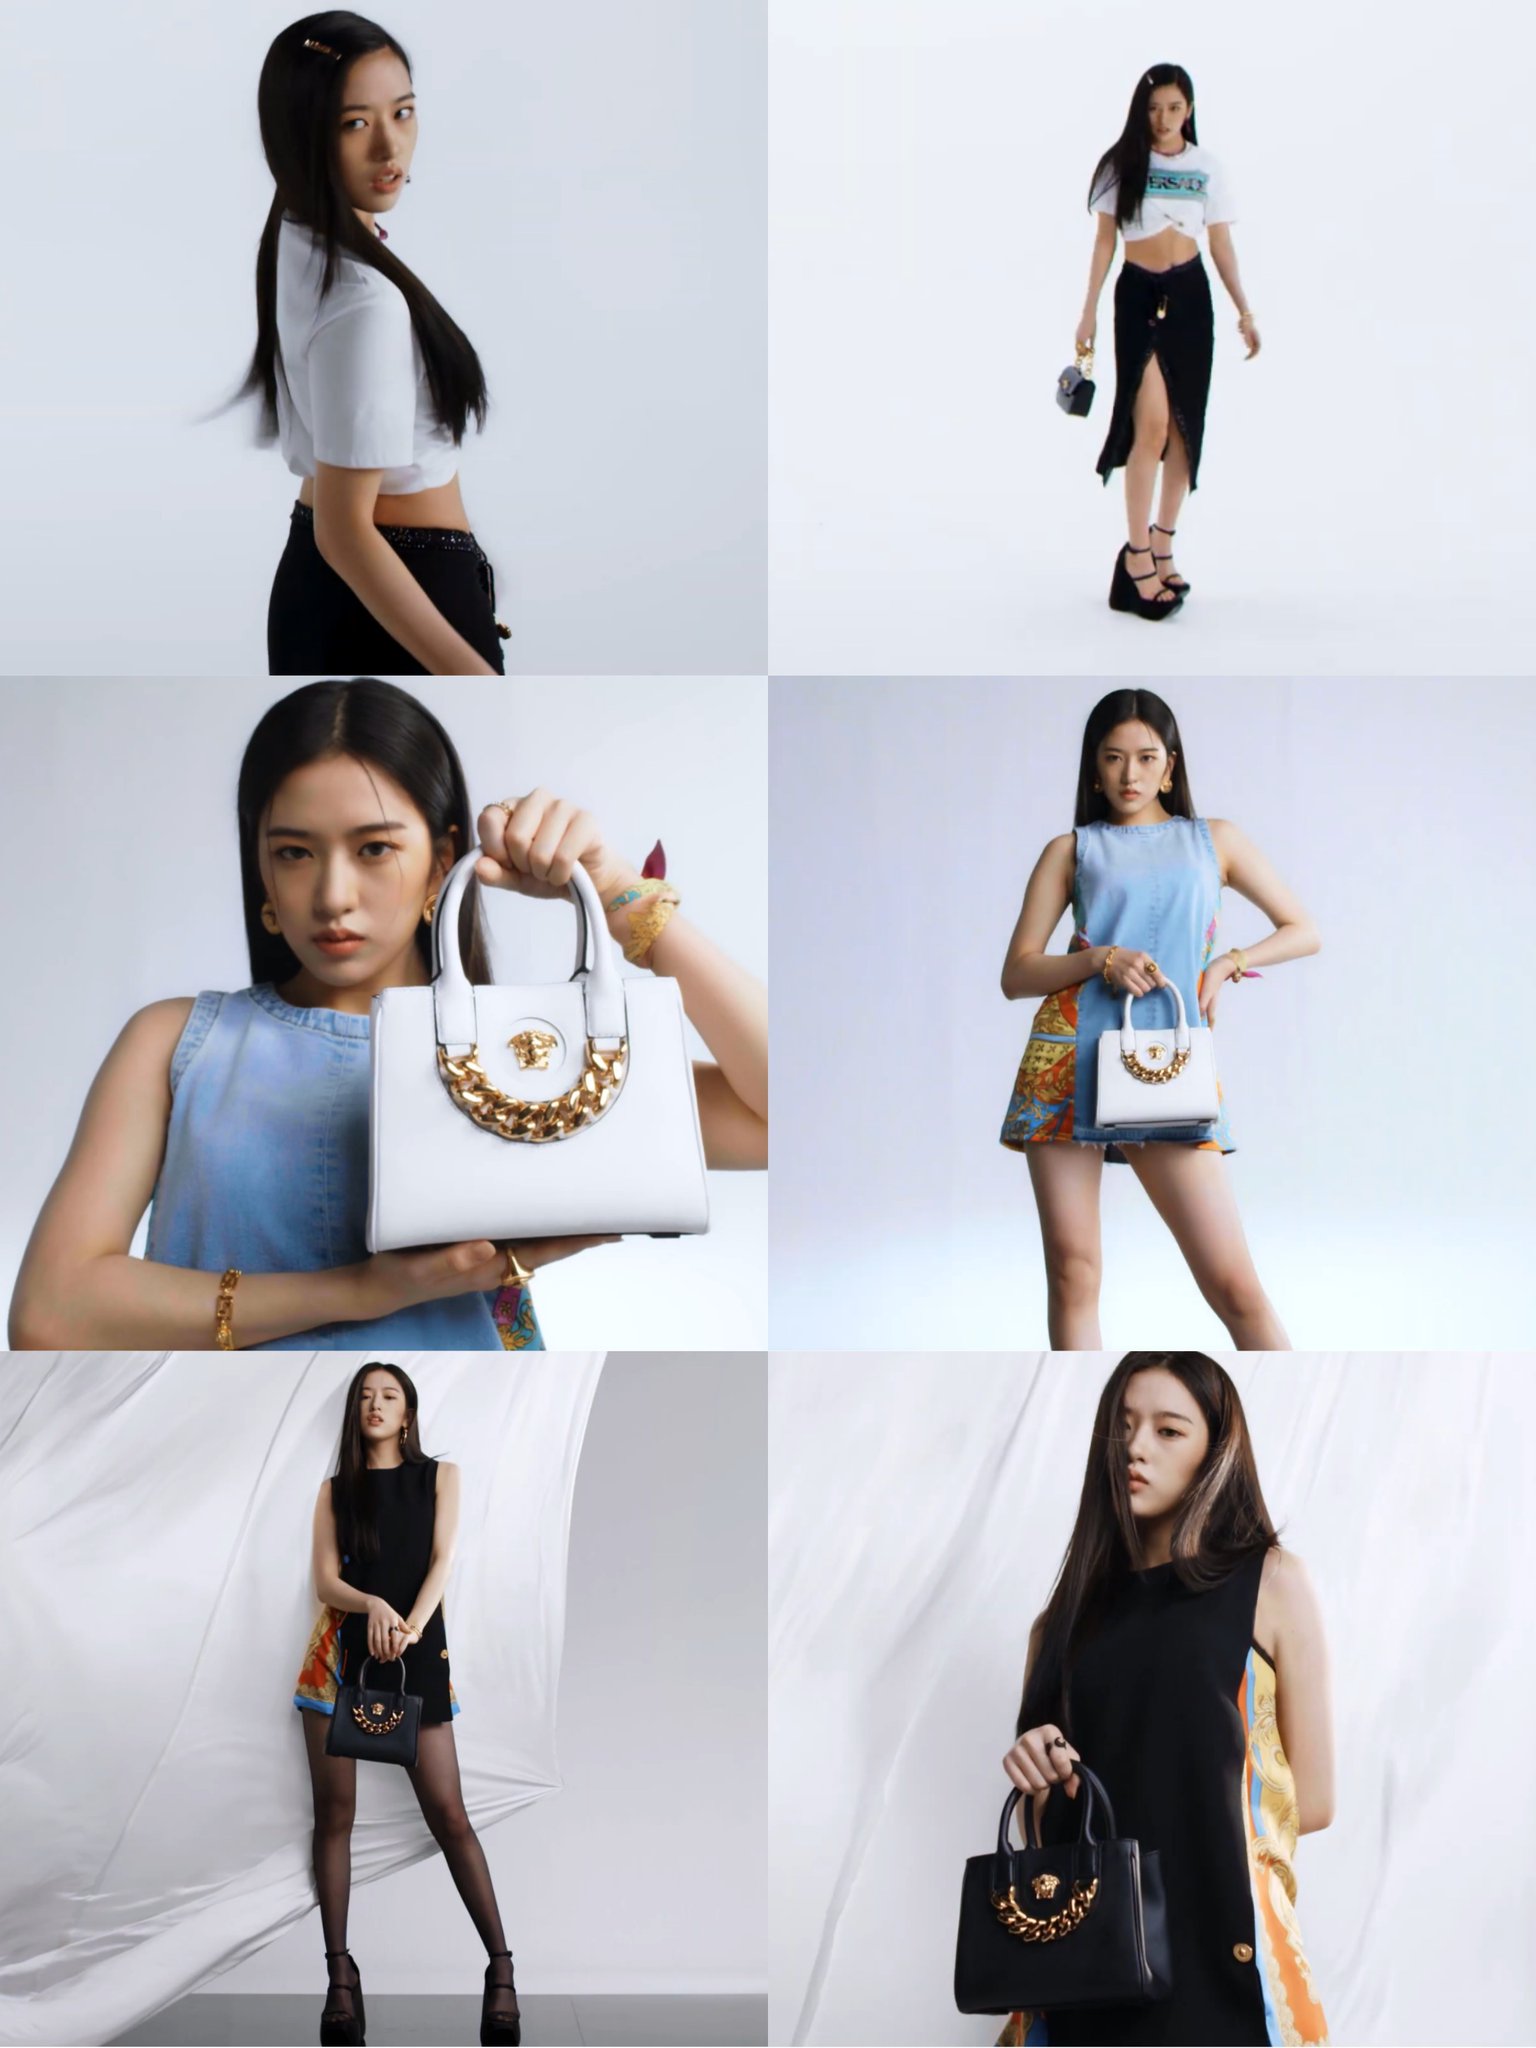 Yujin as the new face of the fashion brand Versace 